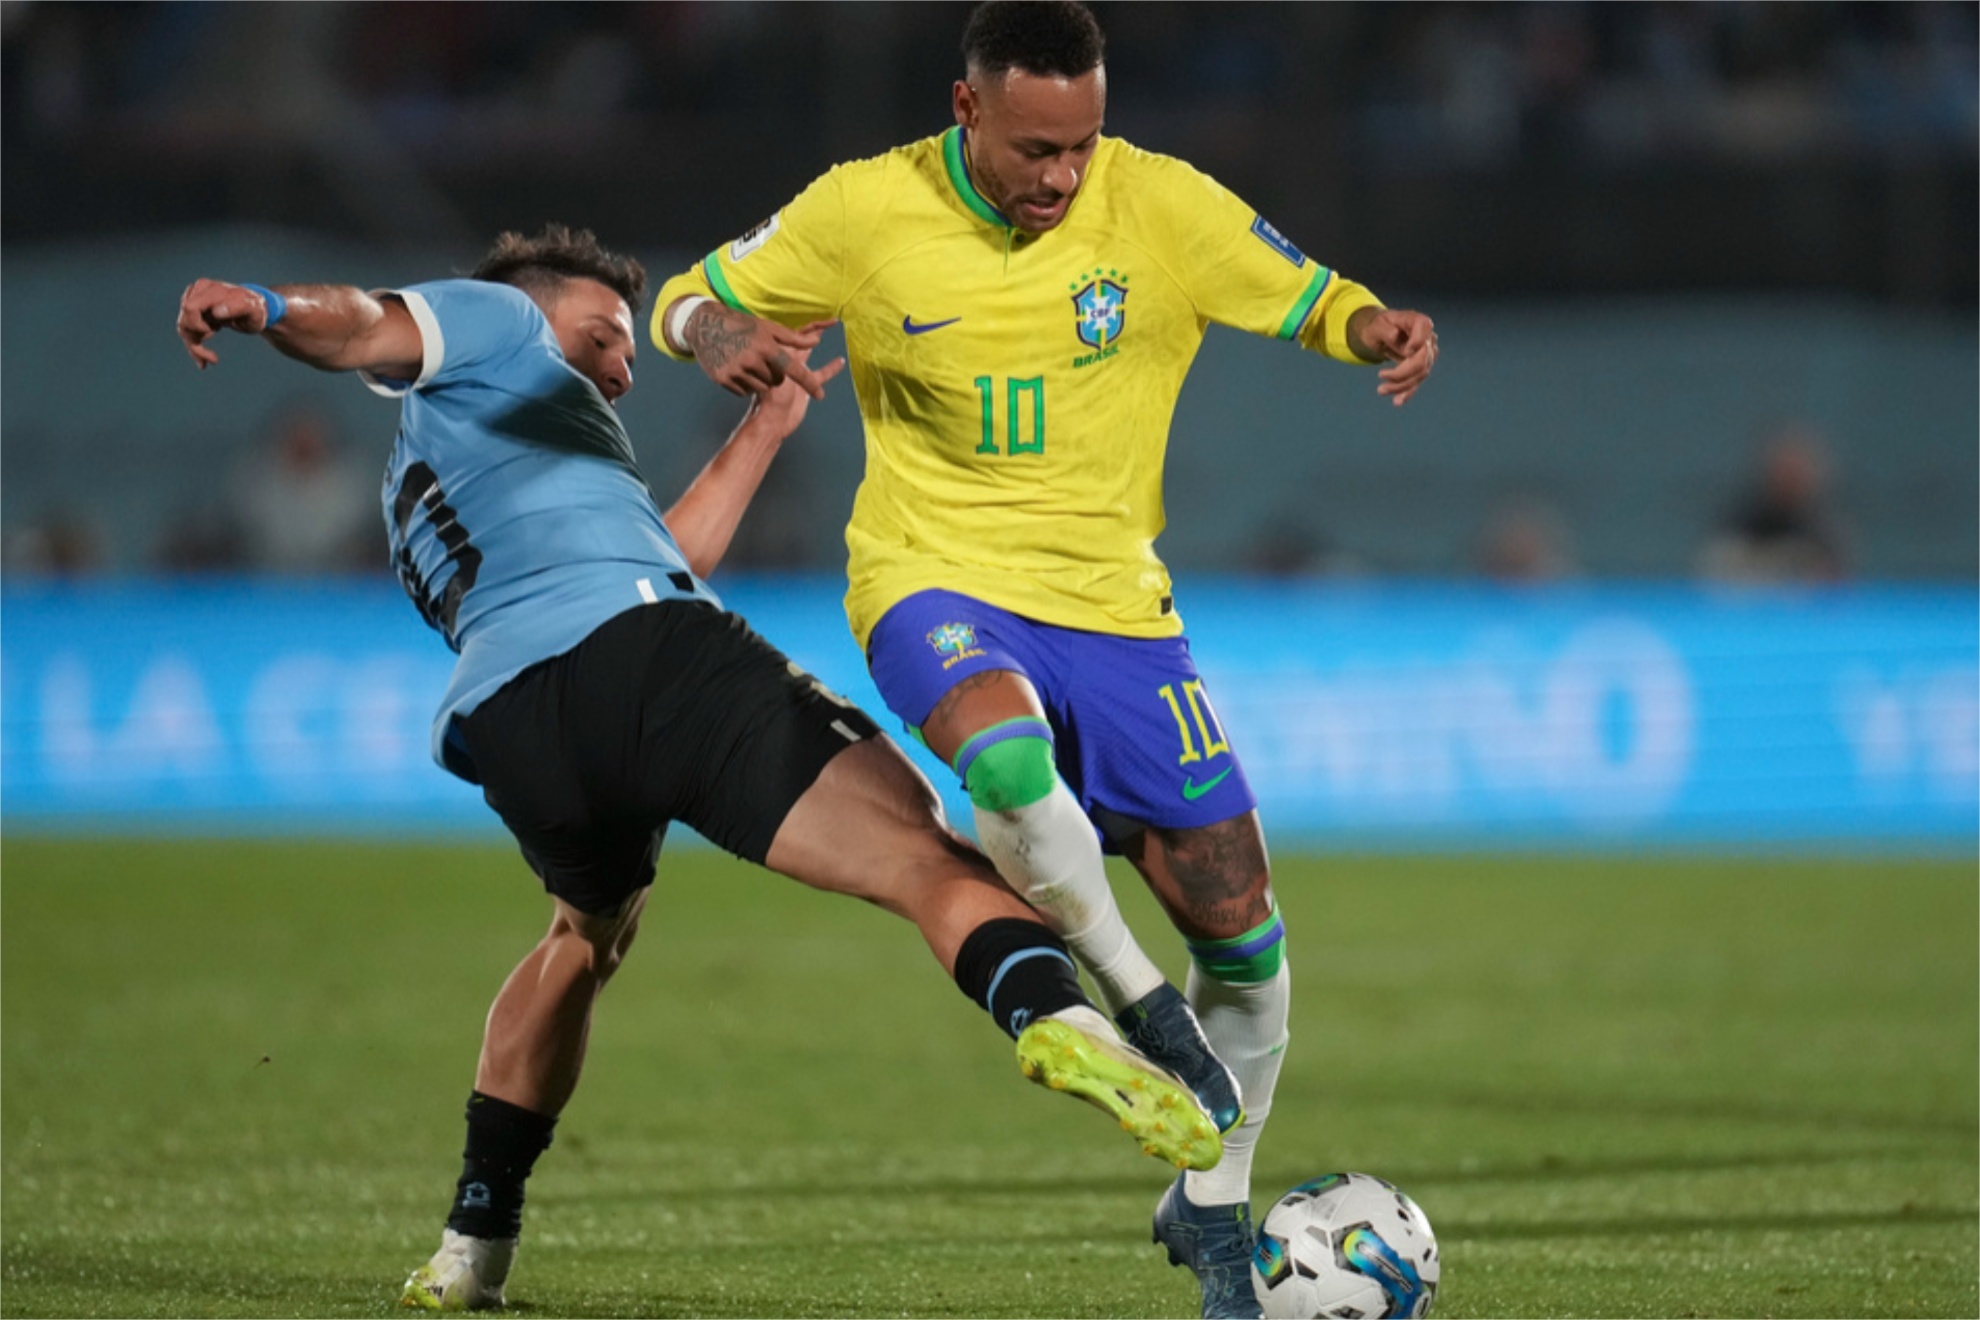 Neymar got injured in Brazils WC qulaifier game against Uruguay on Tuesday